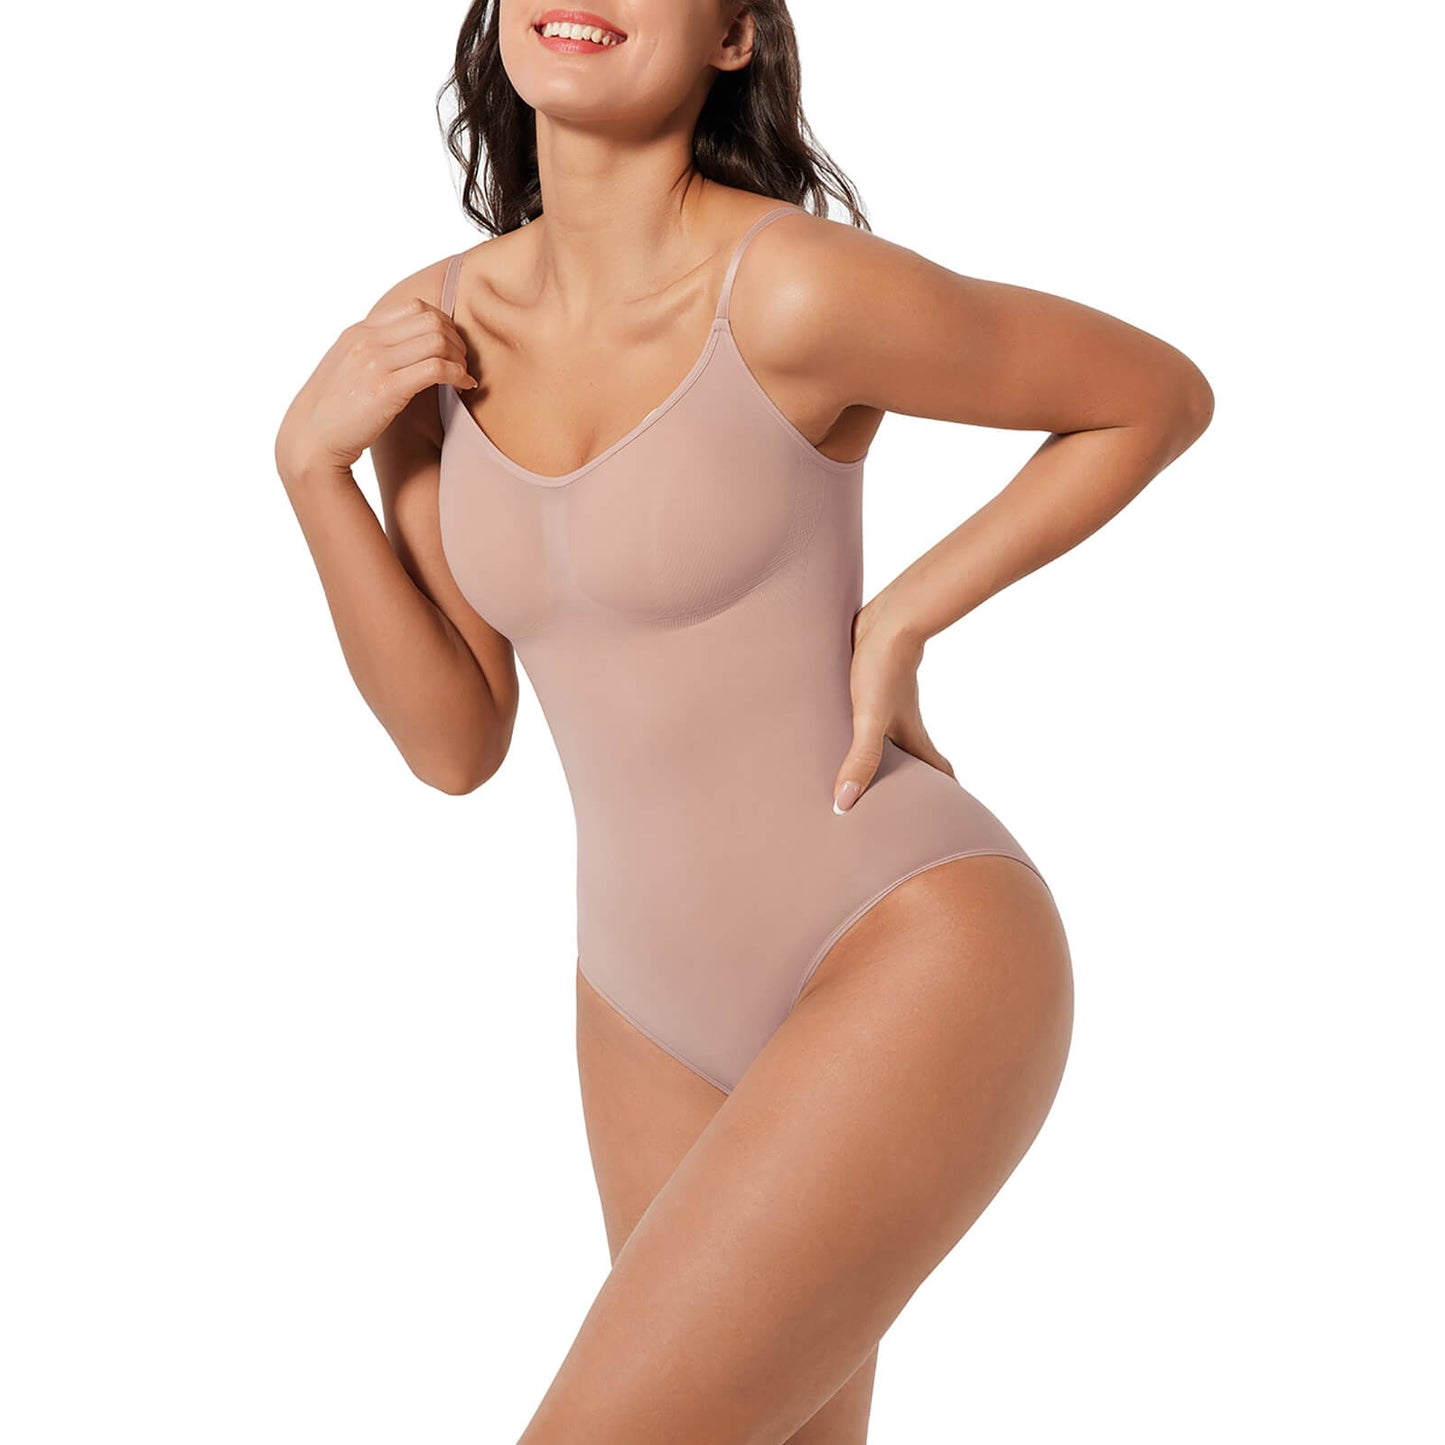 SHAPERINI™ EXTRA SNATCHED BODYSUIT - BUY 1 GET 1 50% OFF